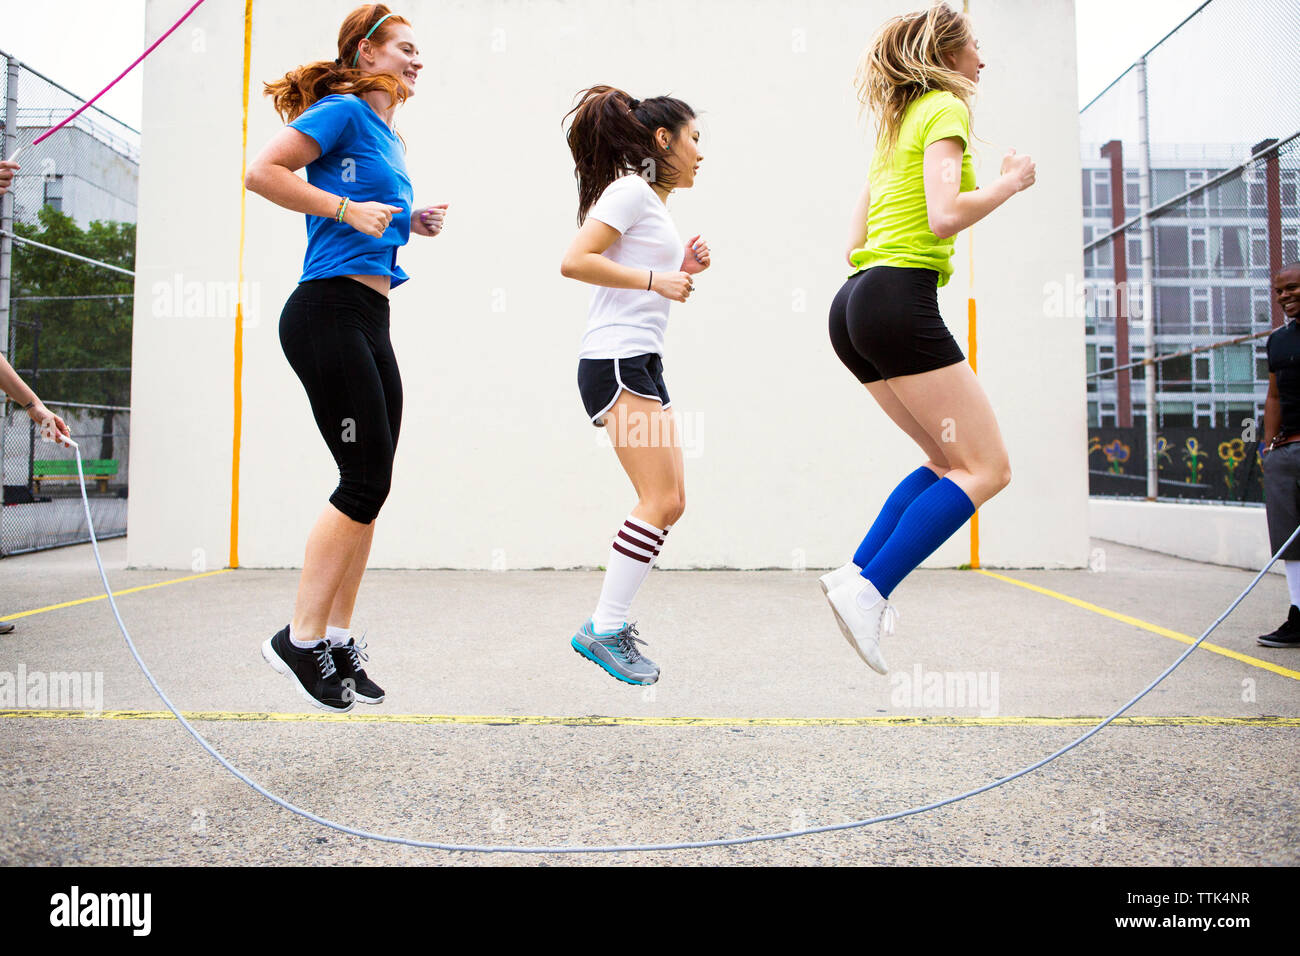 Side view of women performing double Dutch against wall Stock Photo